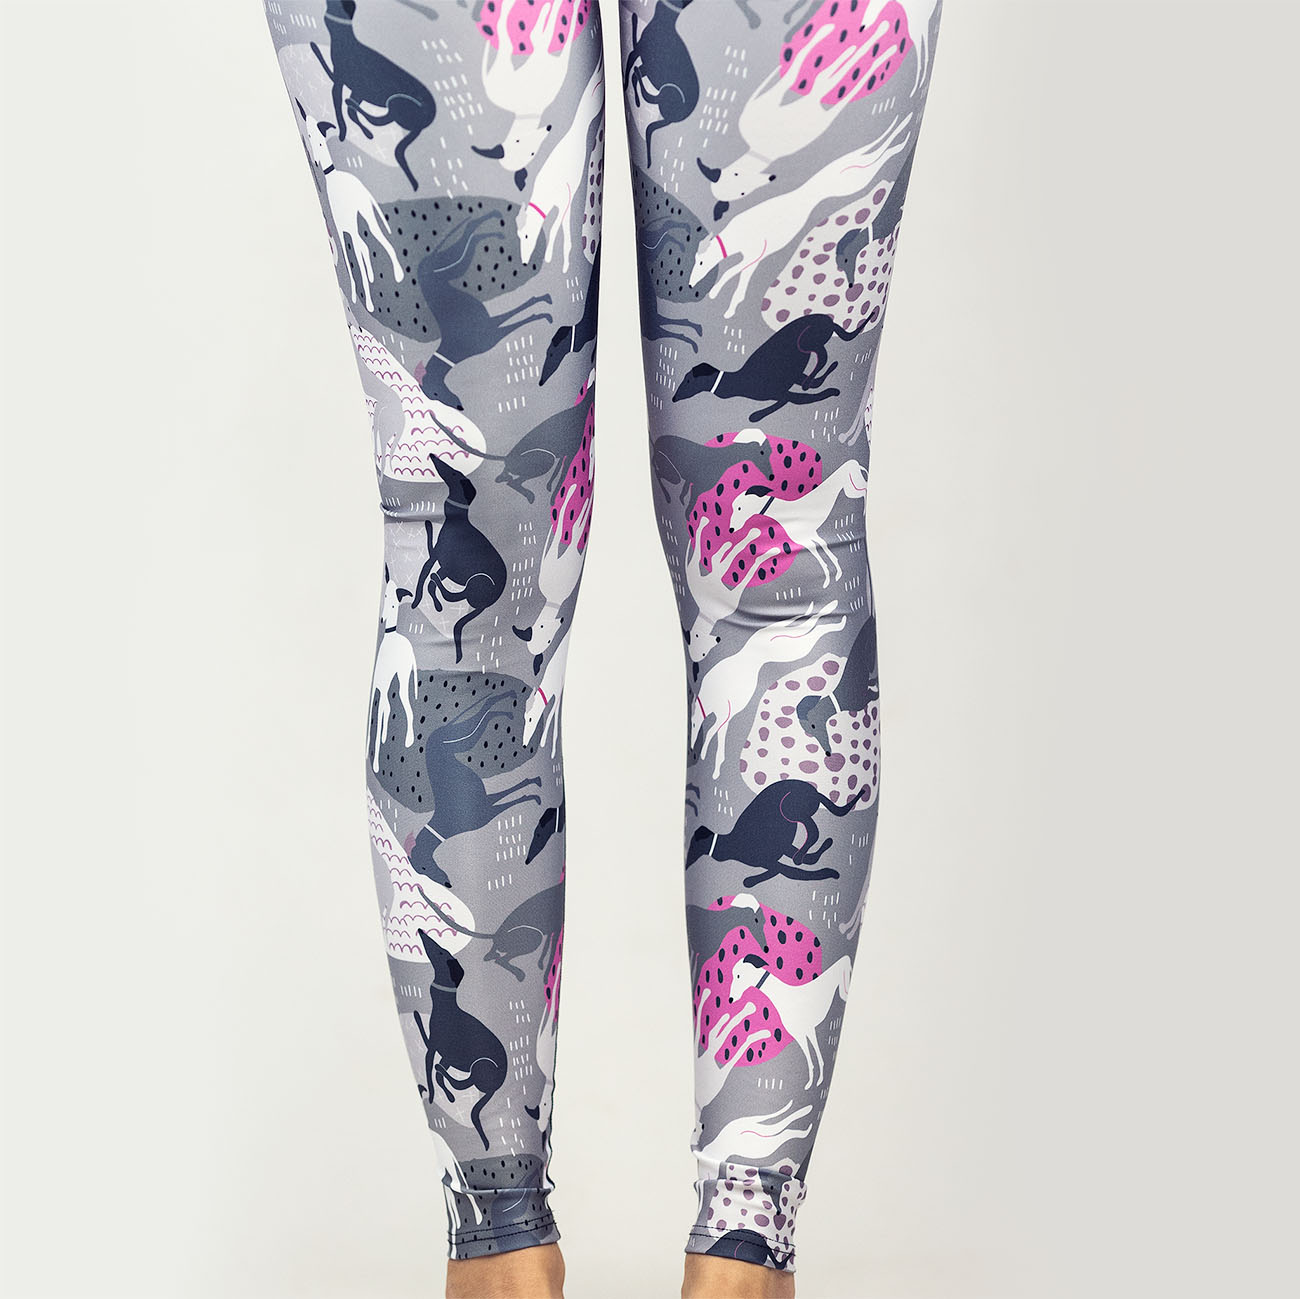 Sighthound leggings IGGY COLOR HEX - Wear.Chartbeat image 4